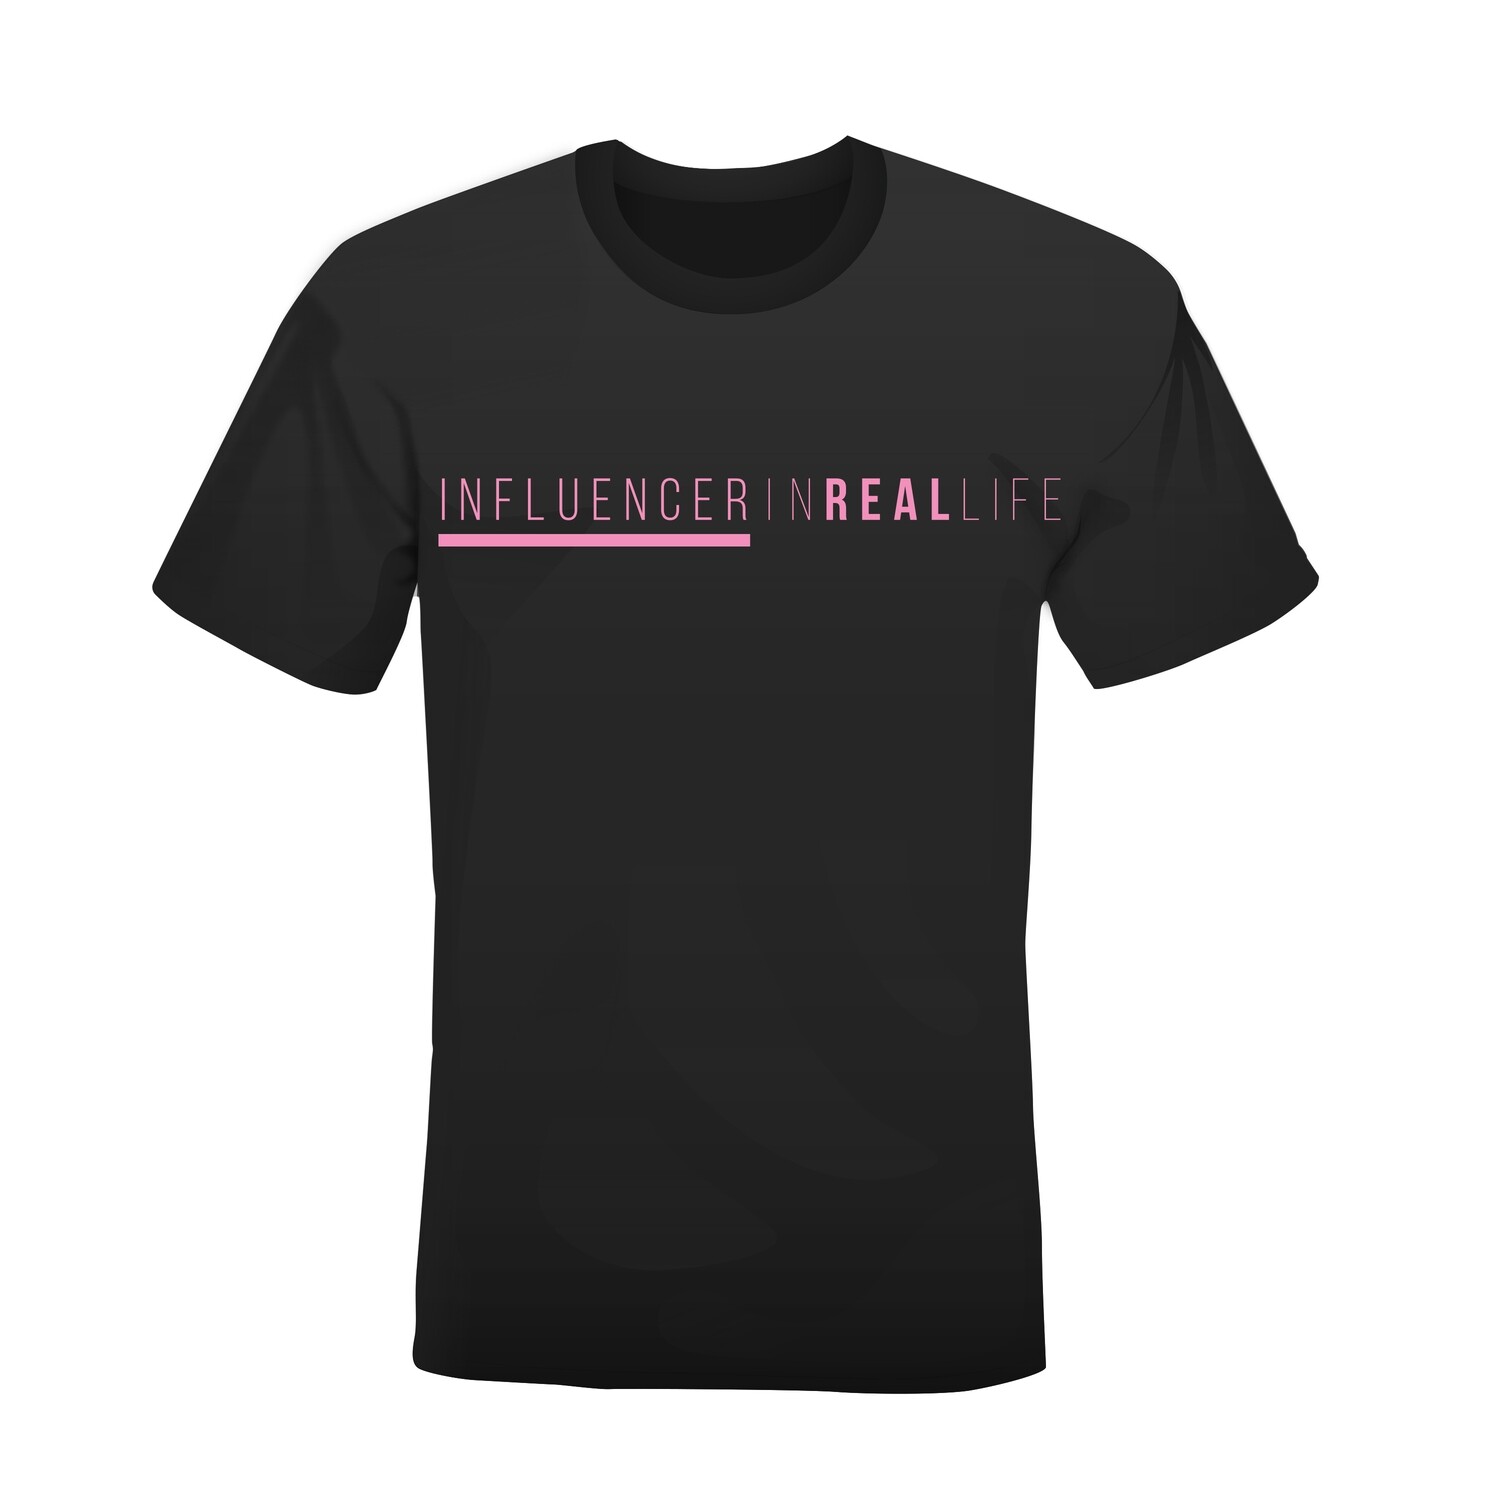 SMALL ONLY - Influencer in Real Life Black T-shirt